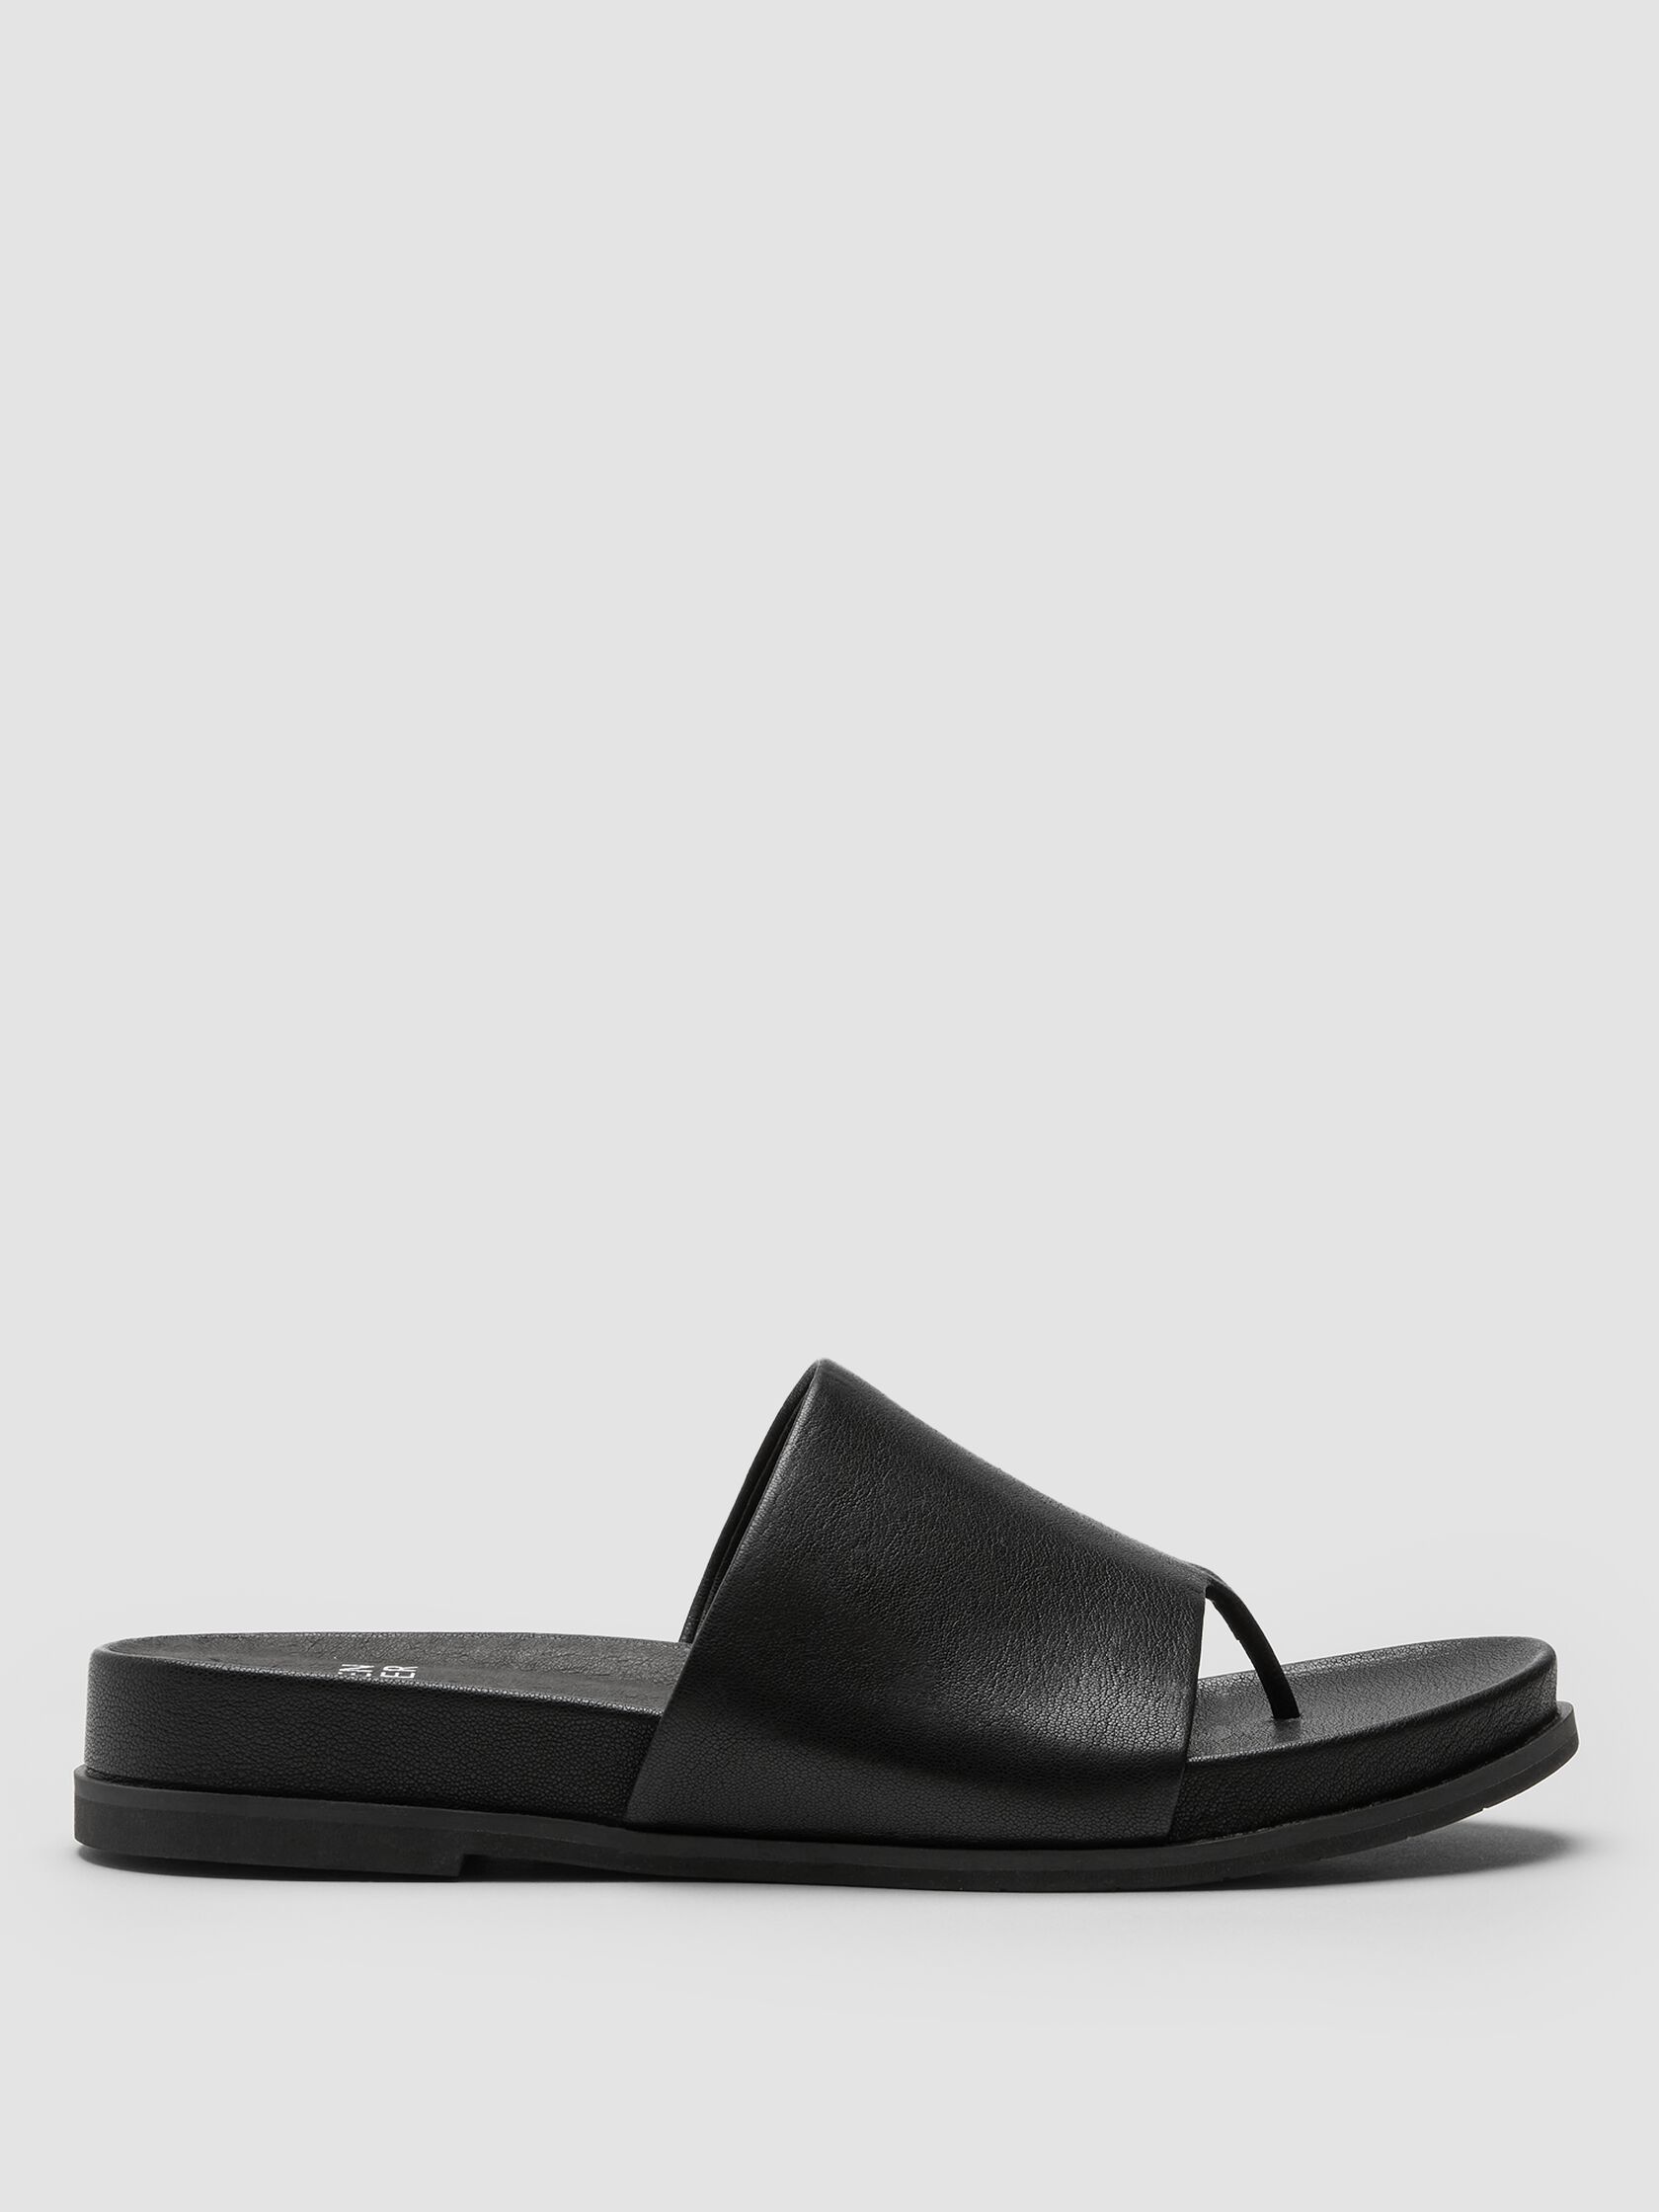 Duet Tumbled Leather Sandal | EILEEN FISHER